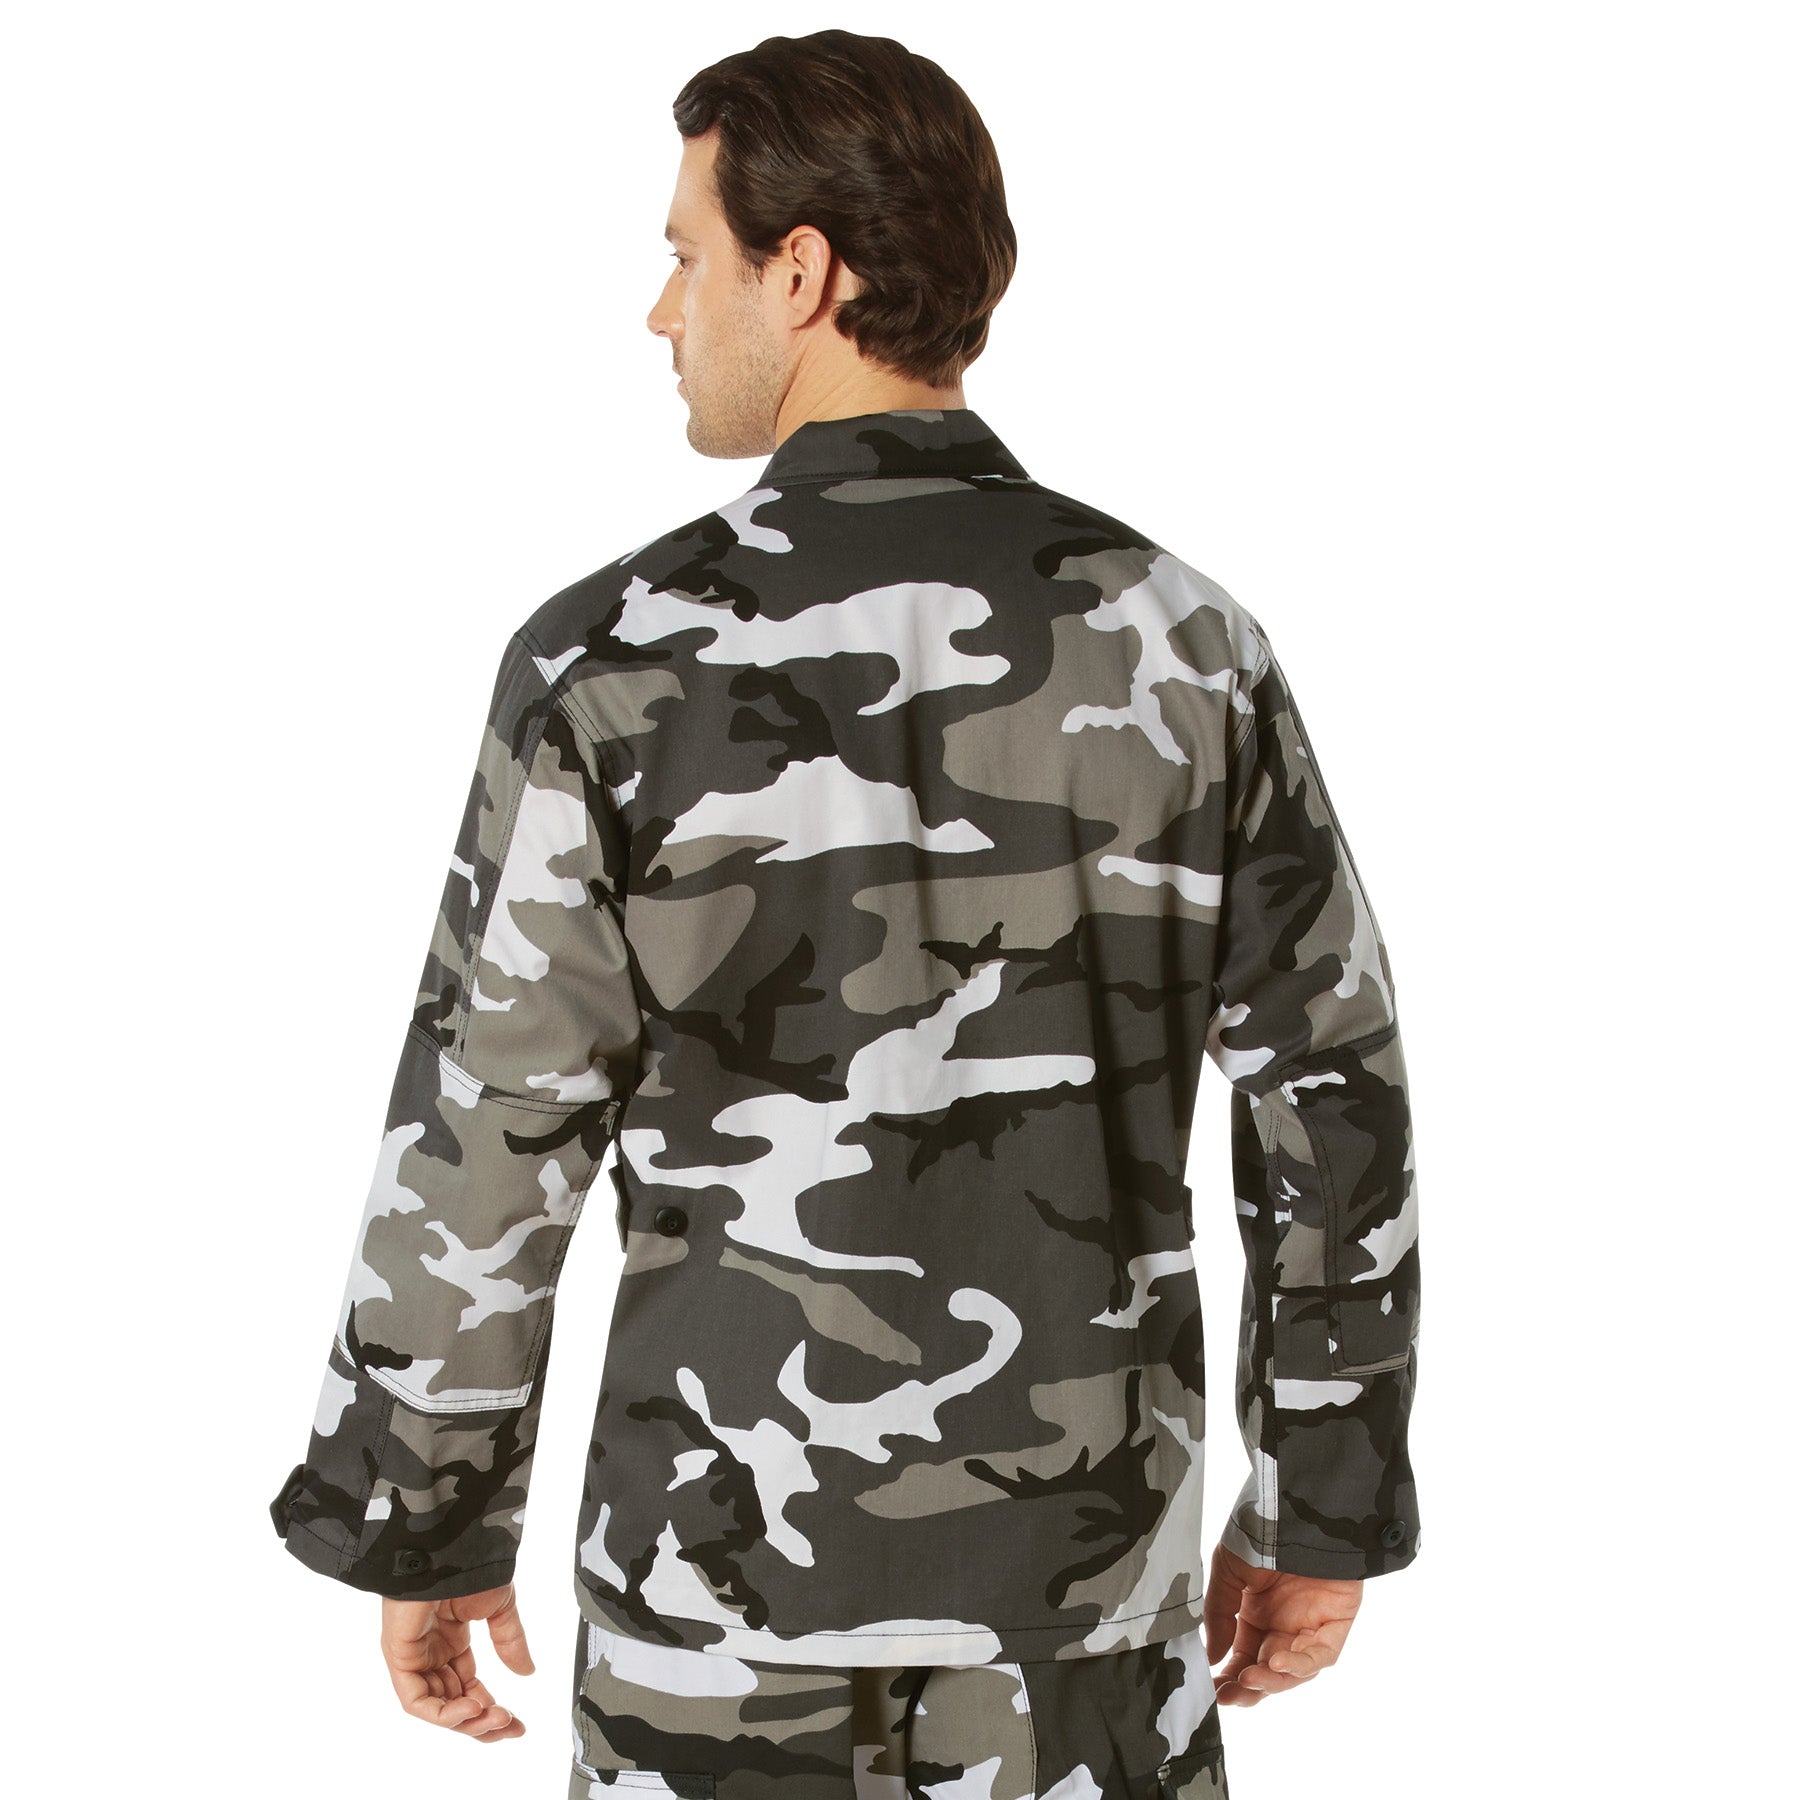 Designed to provide resiliency and comfort for the wearer, Rothco’s Camo BDU Shirts are the ultimate military shirt for active duty personnel and MilSim enthusiasts. www.defenceqstore.com.au